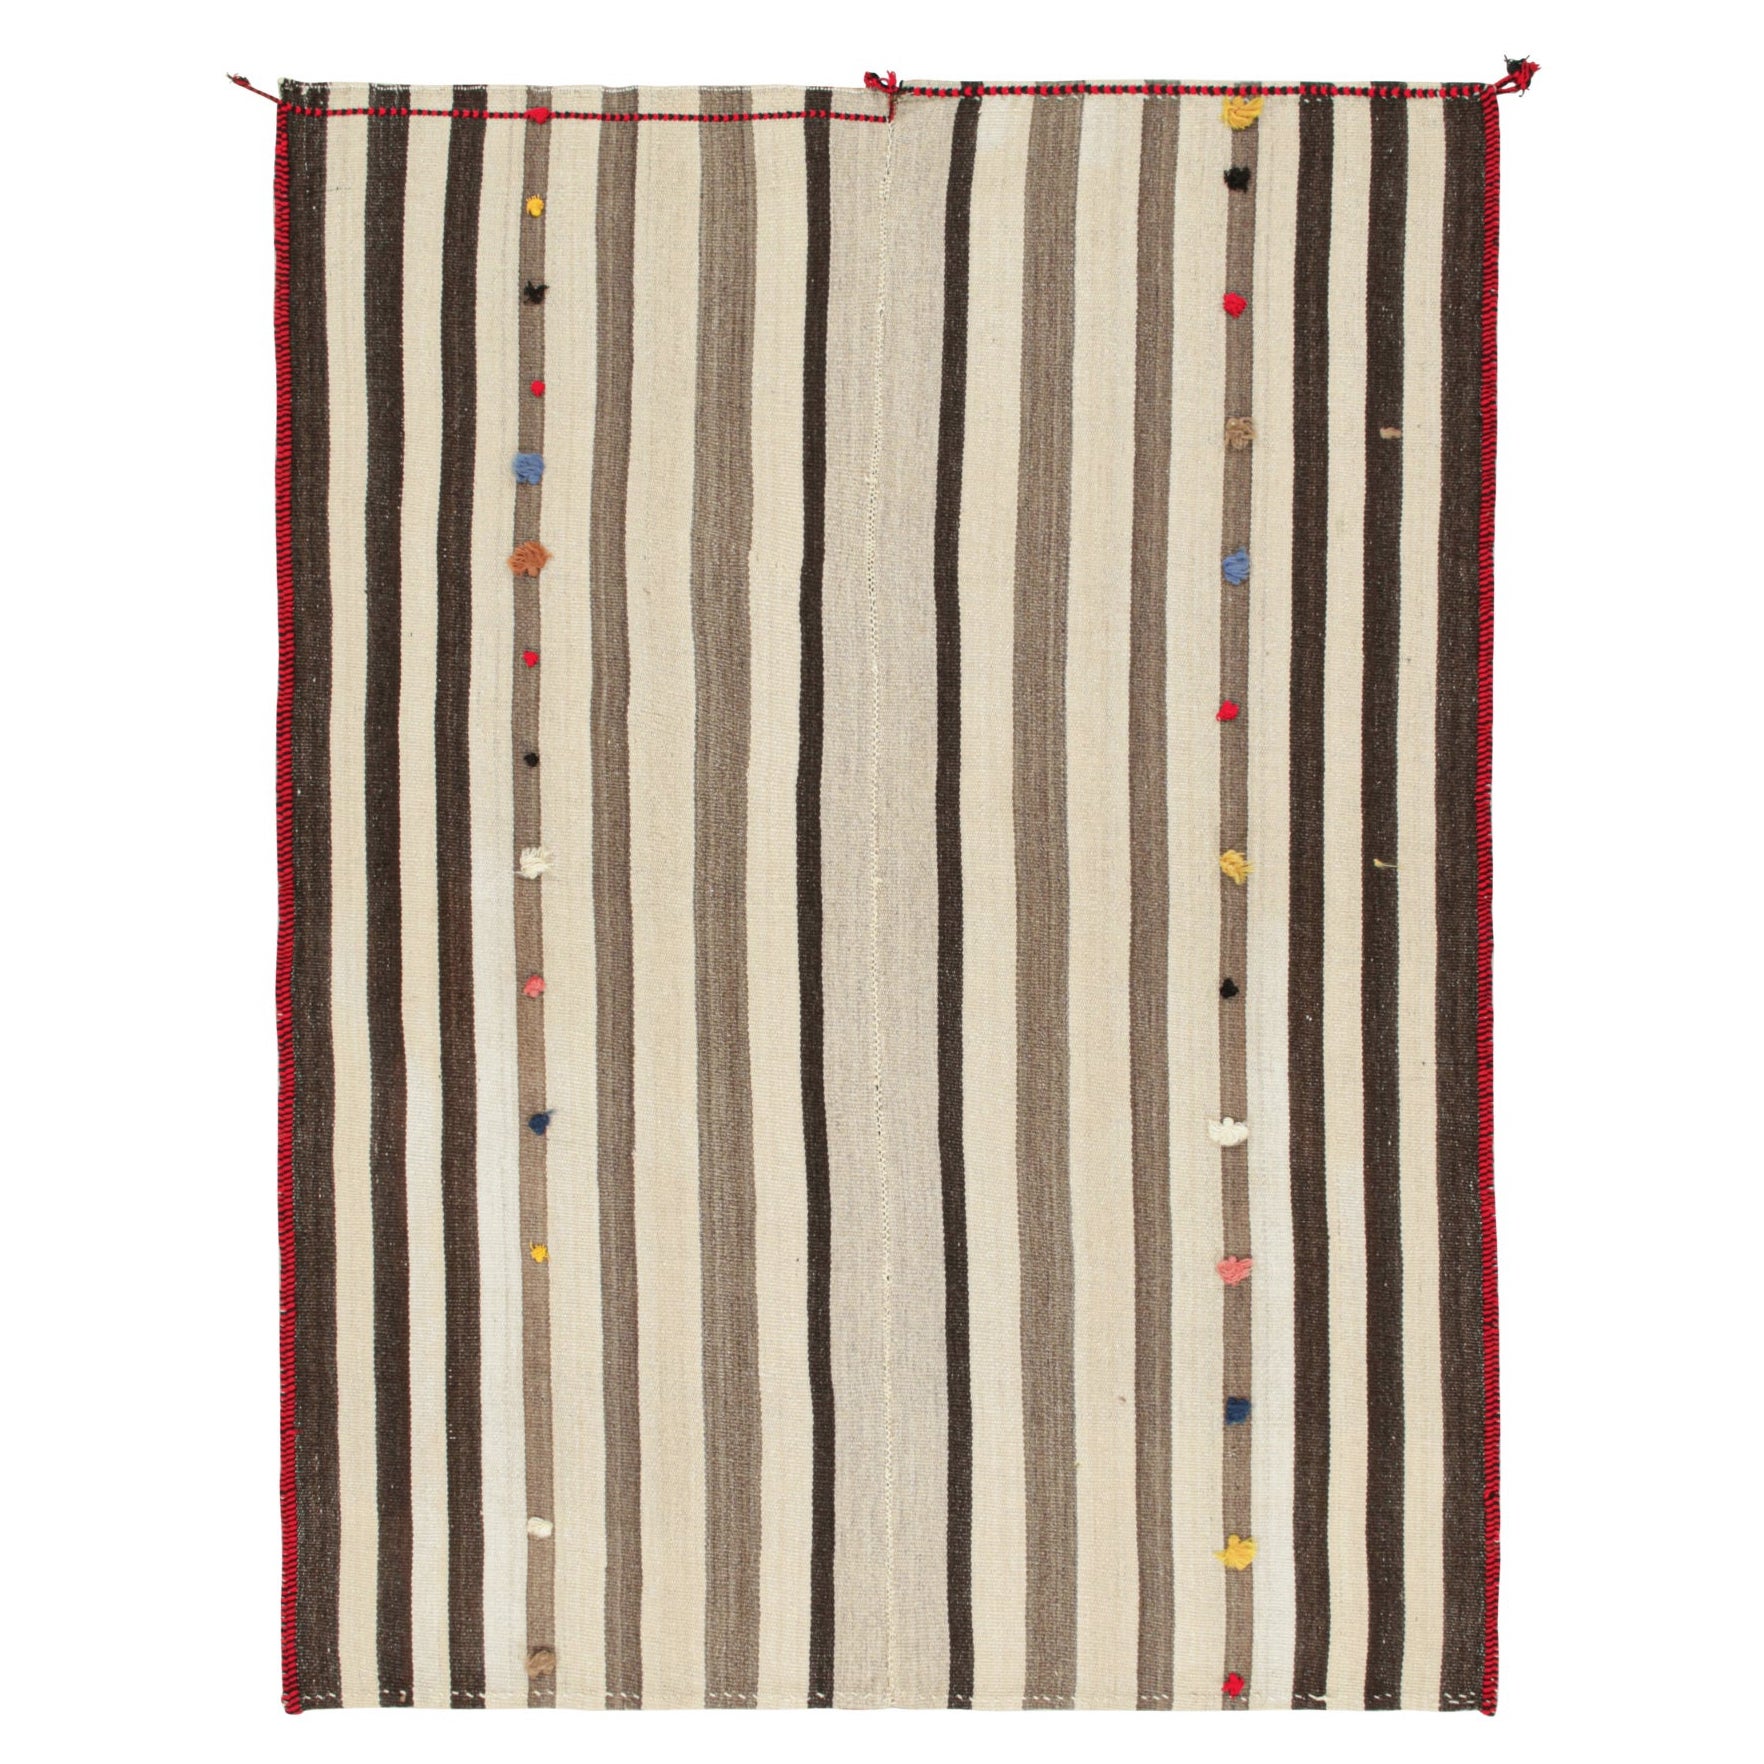 Vintage Persian Kilim in Beige-Brown Stripes, Panel Style For Sale